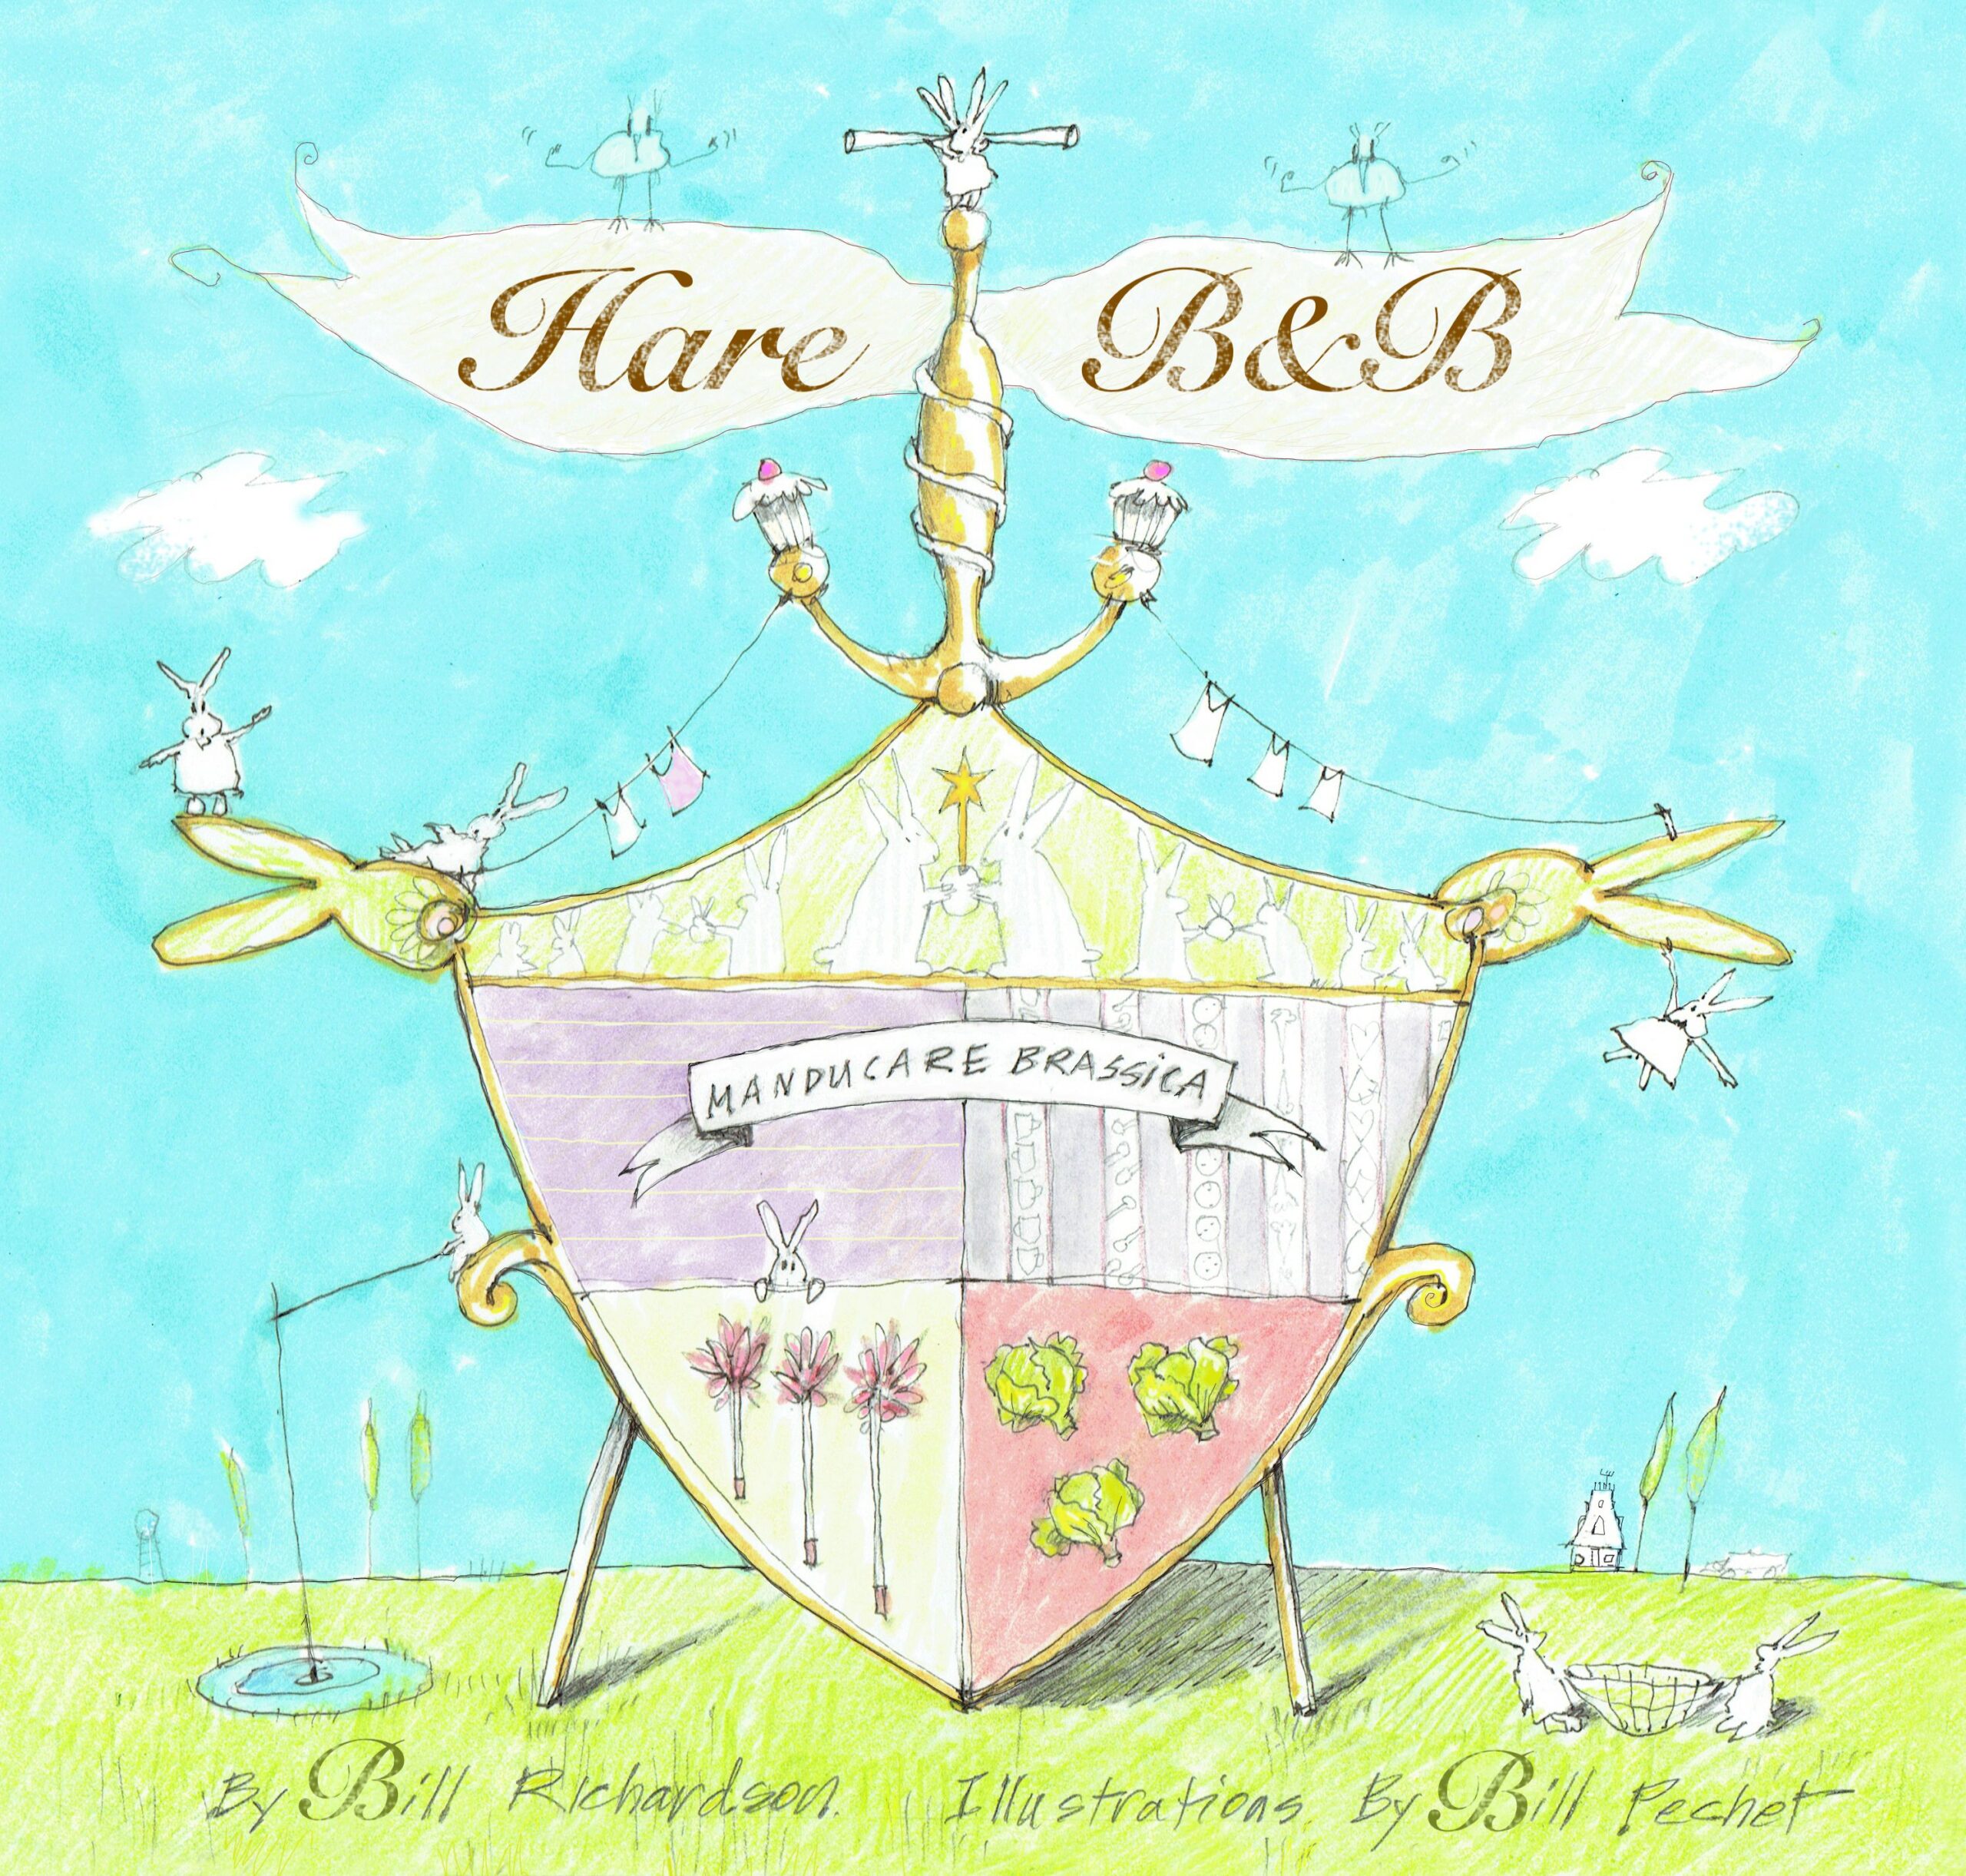 Young Reader Review: Hare B&B by Bill Richardson